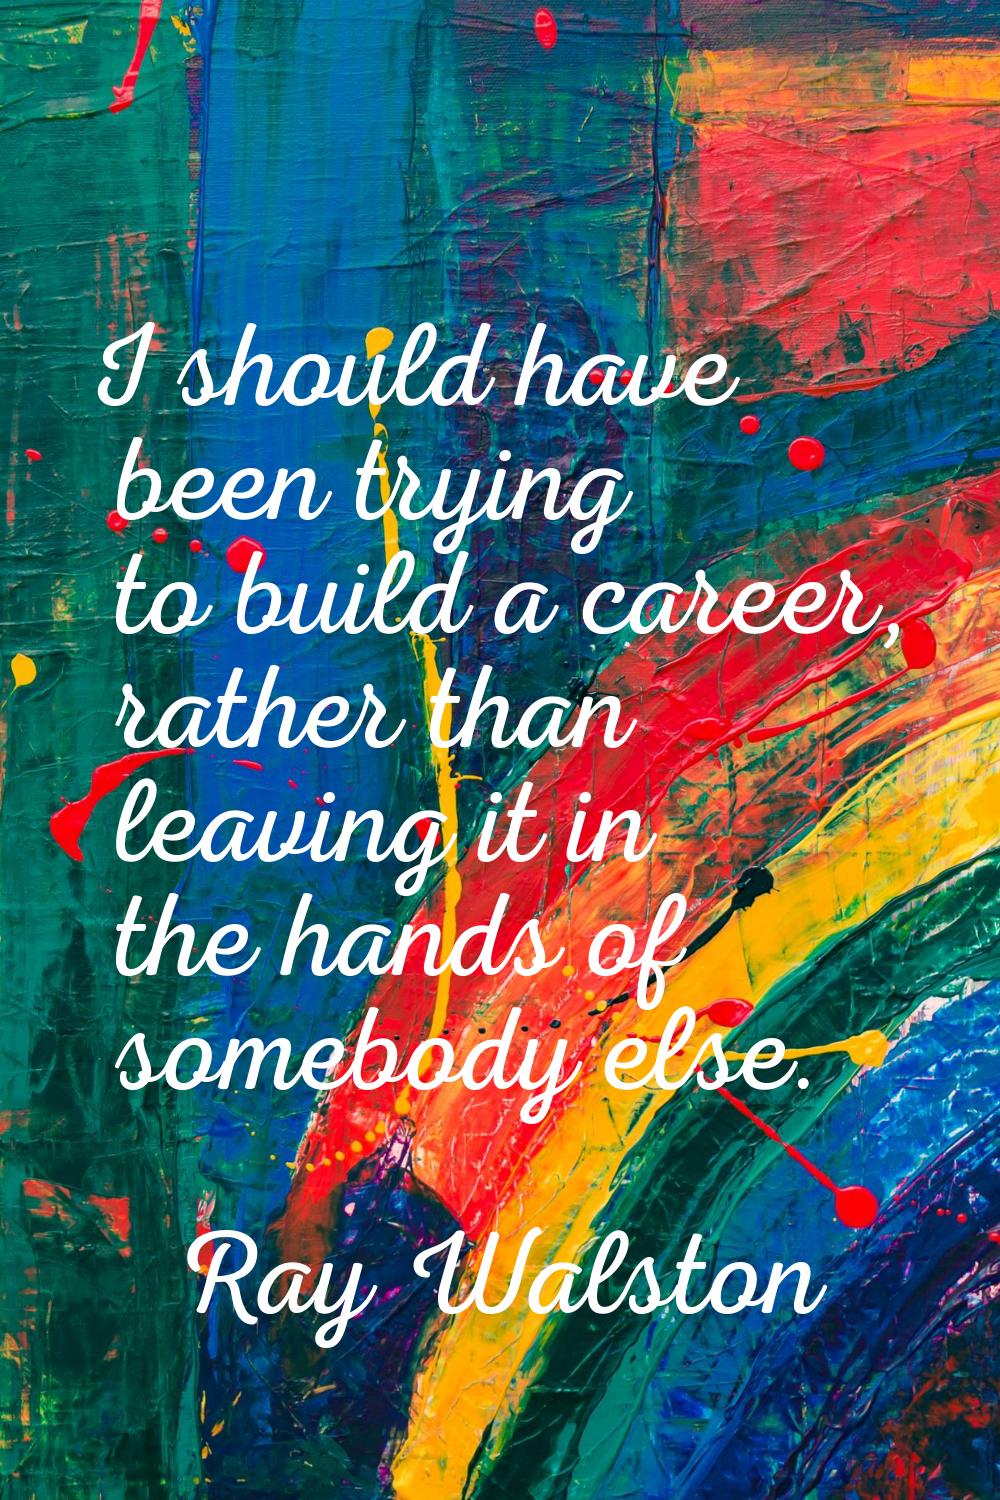 I should have been trying to build a career, rather than leaving it in the hands of somebody else.